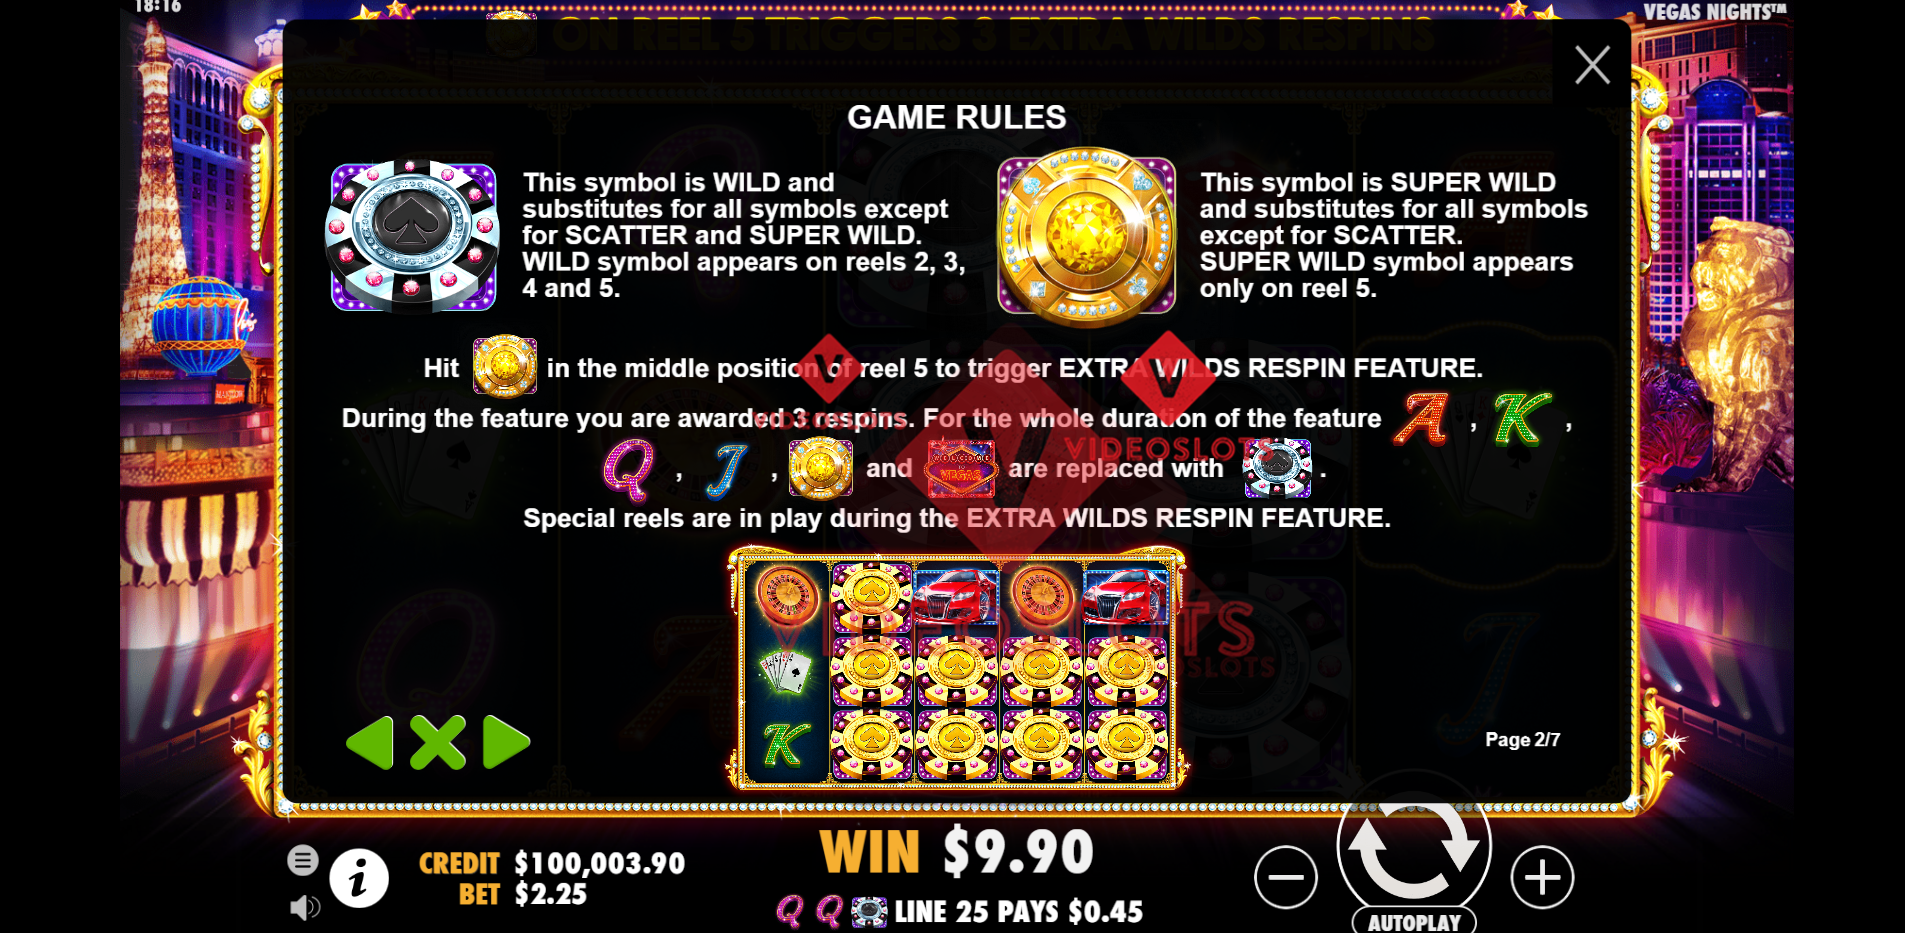 Game Rules for Vegas Nights slot by Pragmatic Play